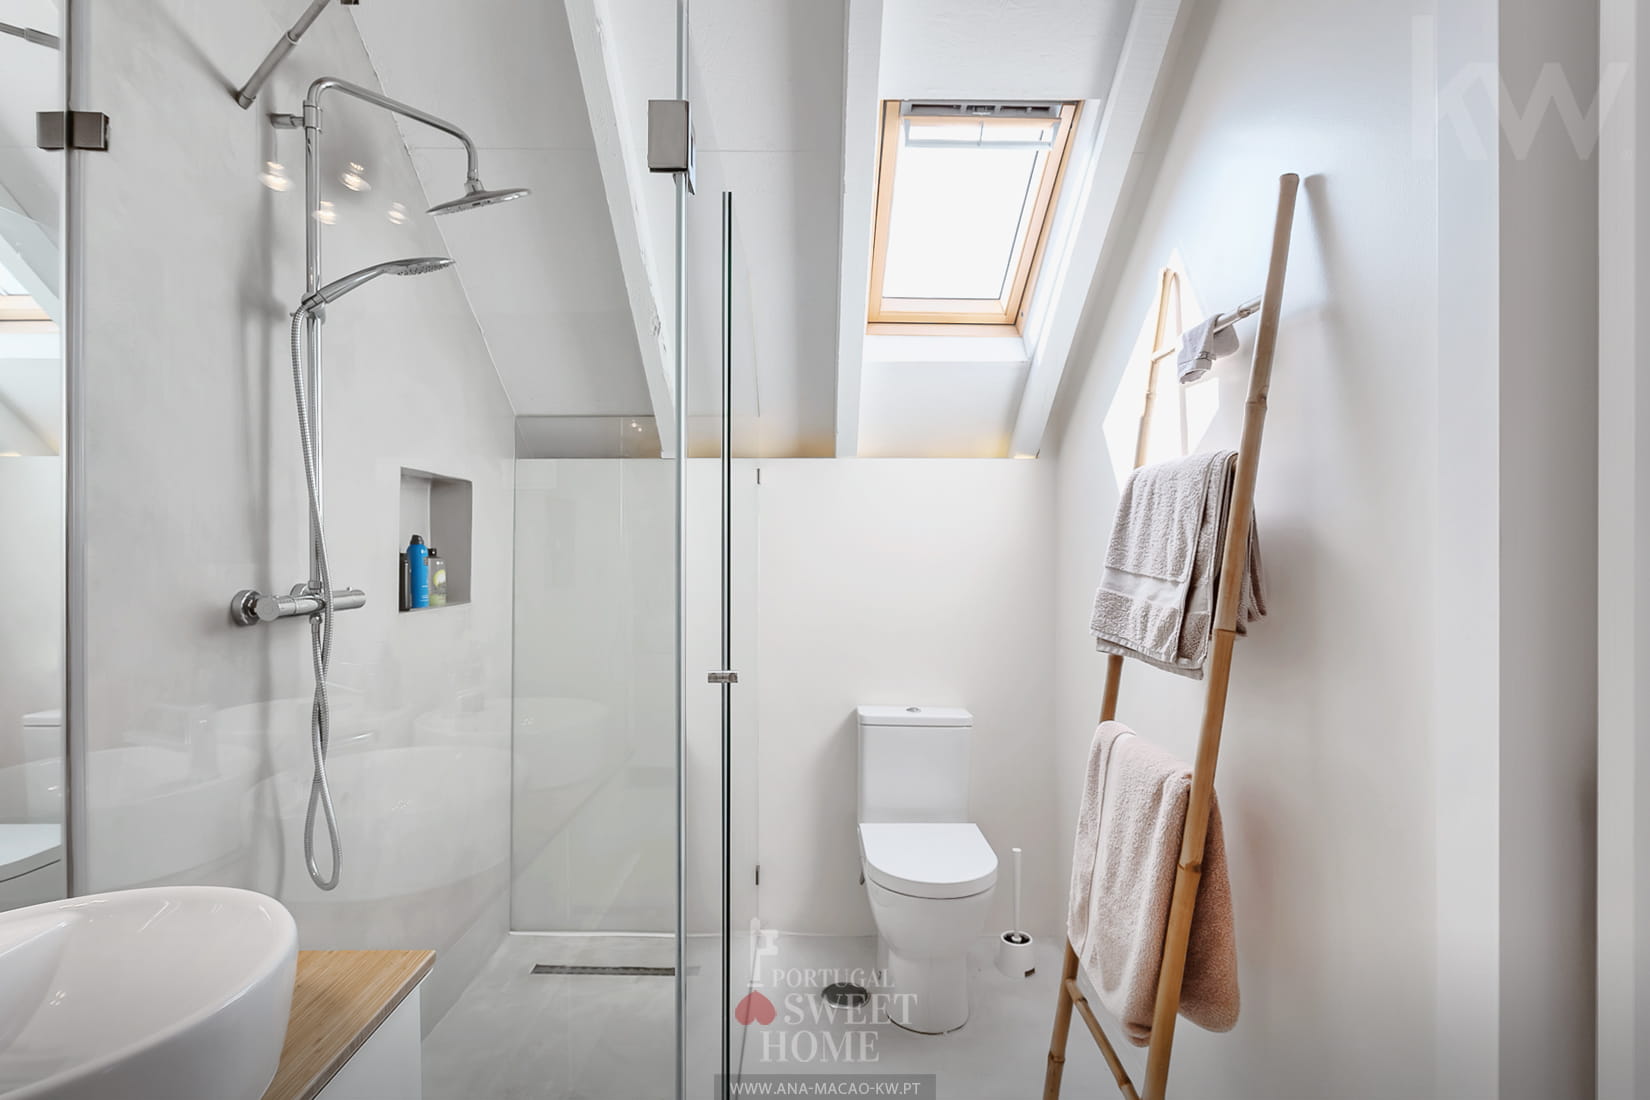 Suite bathroom, with natural light